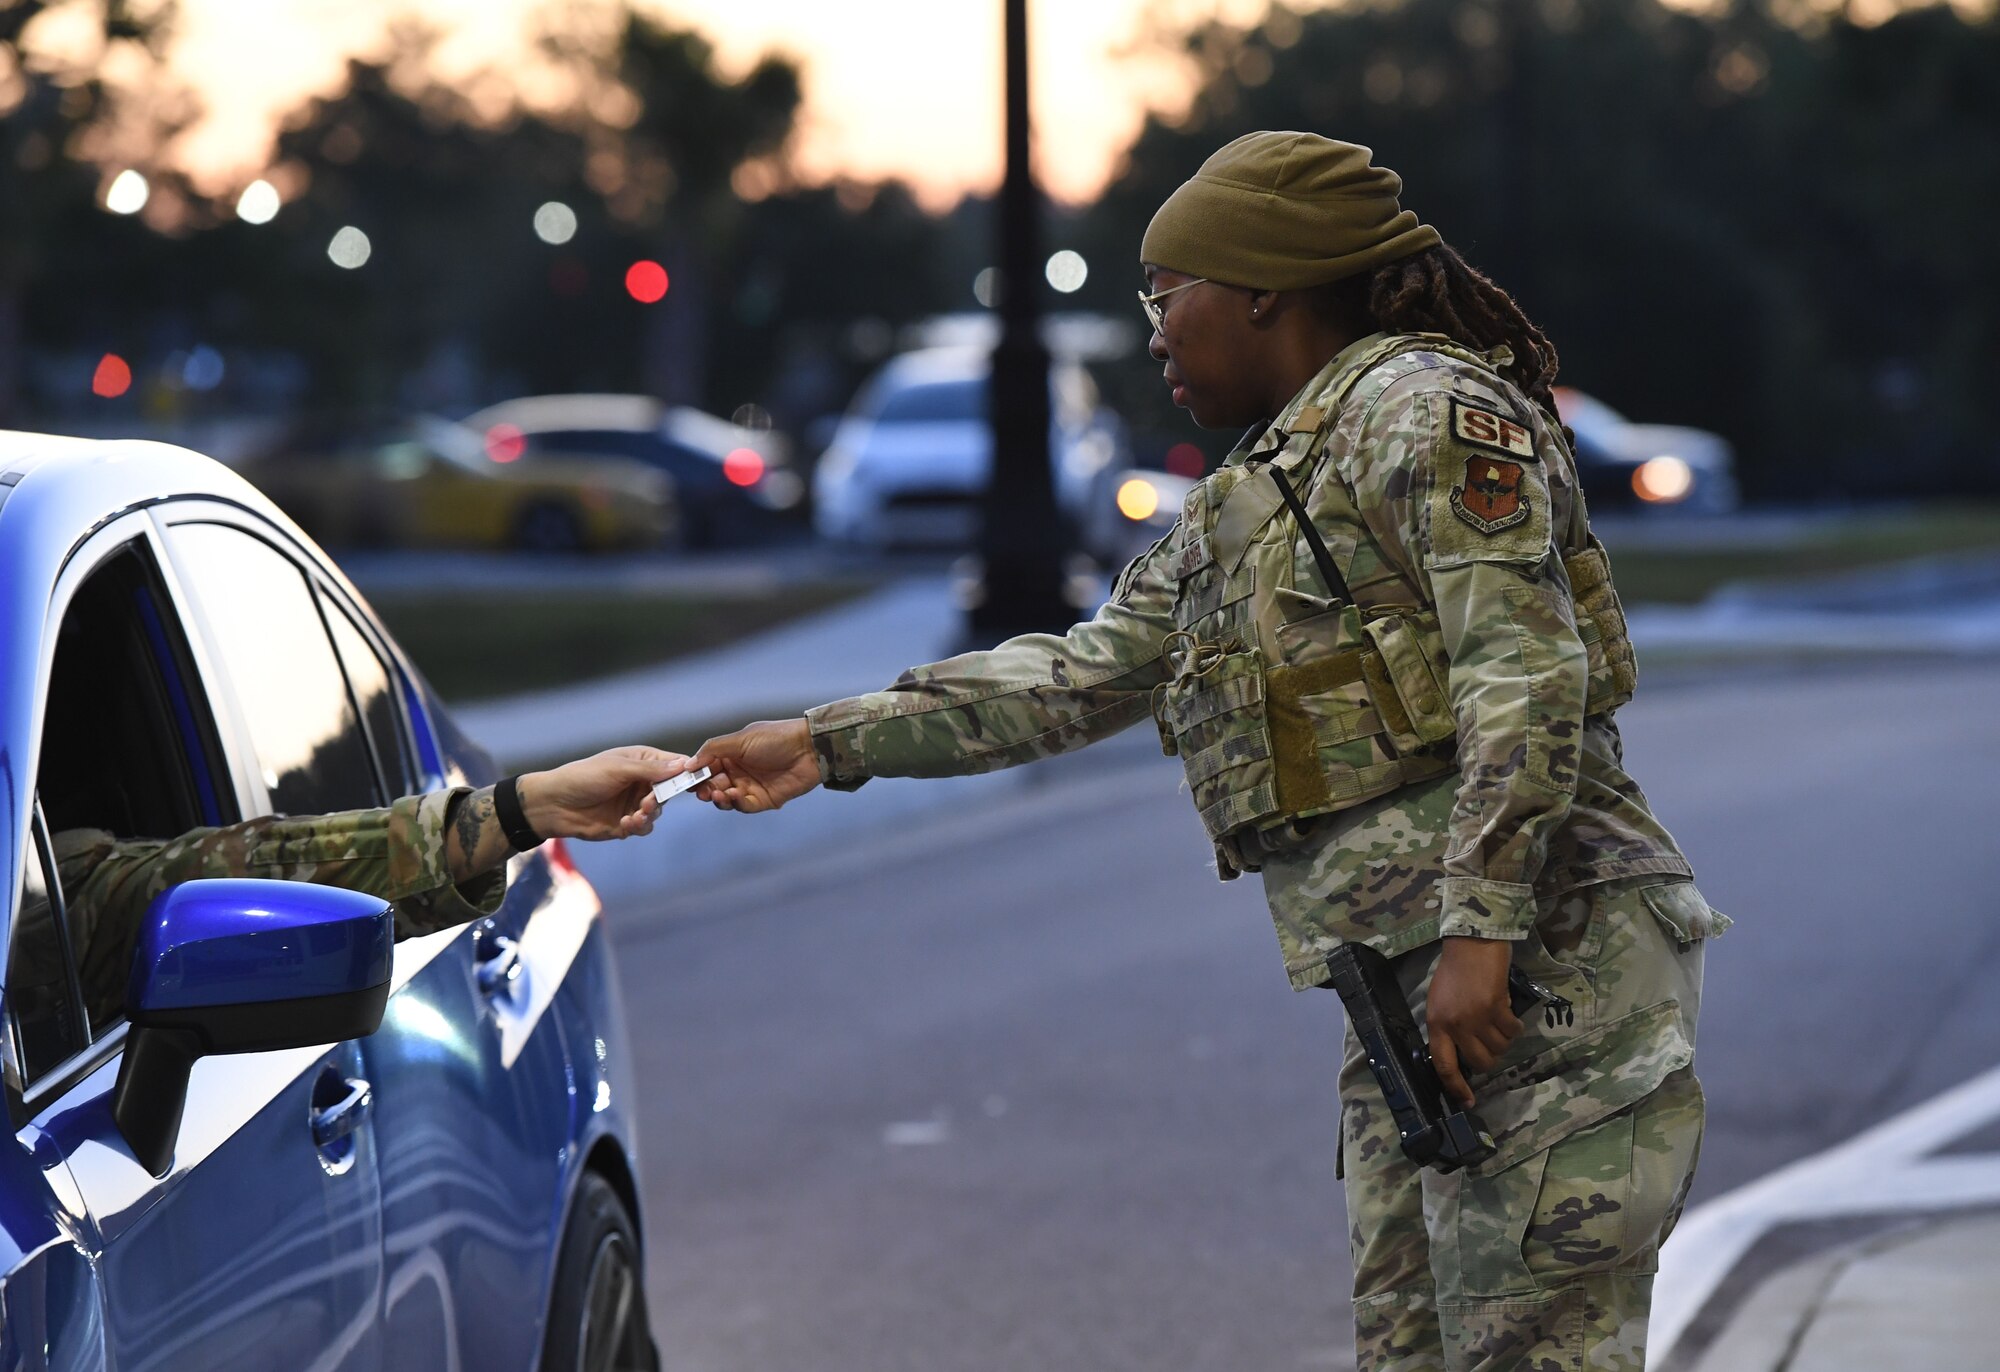 U.S. Air Force Senior Airman Jocilyn Carver, 81st Security Forces Squadron entry controller, conducts an ID check at the Division Street Gate during an All-Female Flight work day at Keesler Air Force Base, Mississippi, March 30, 2023.